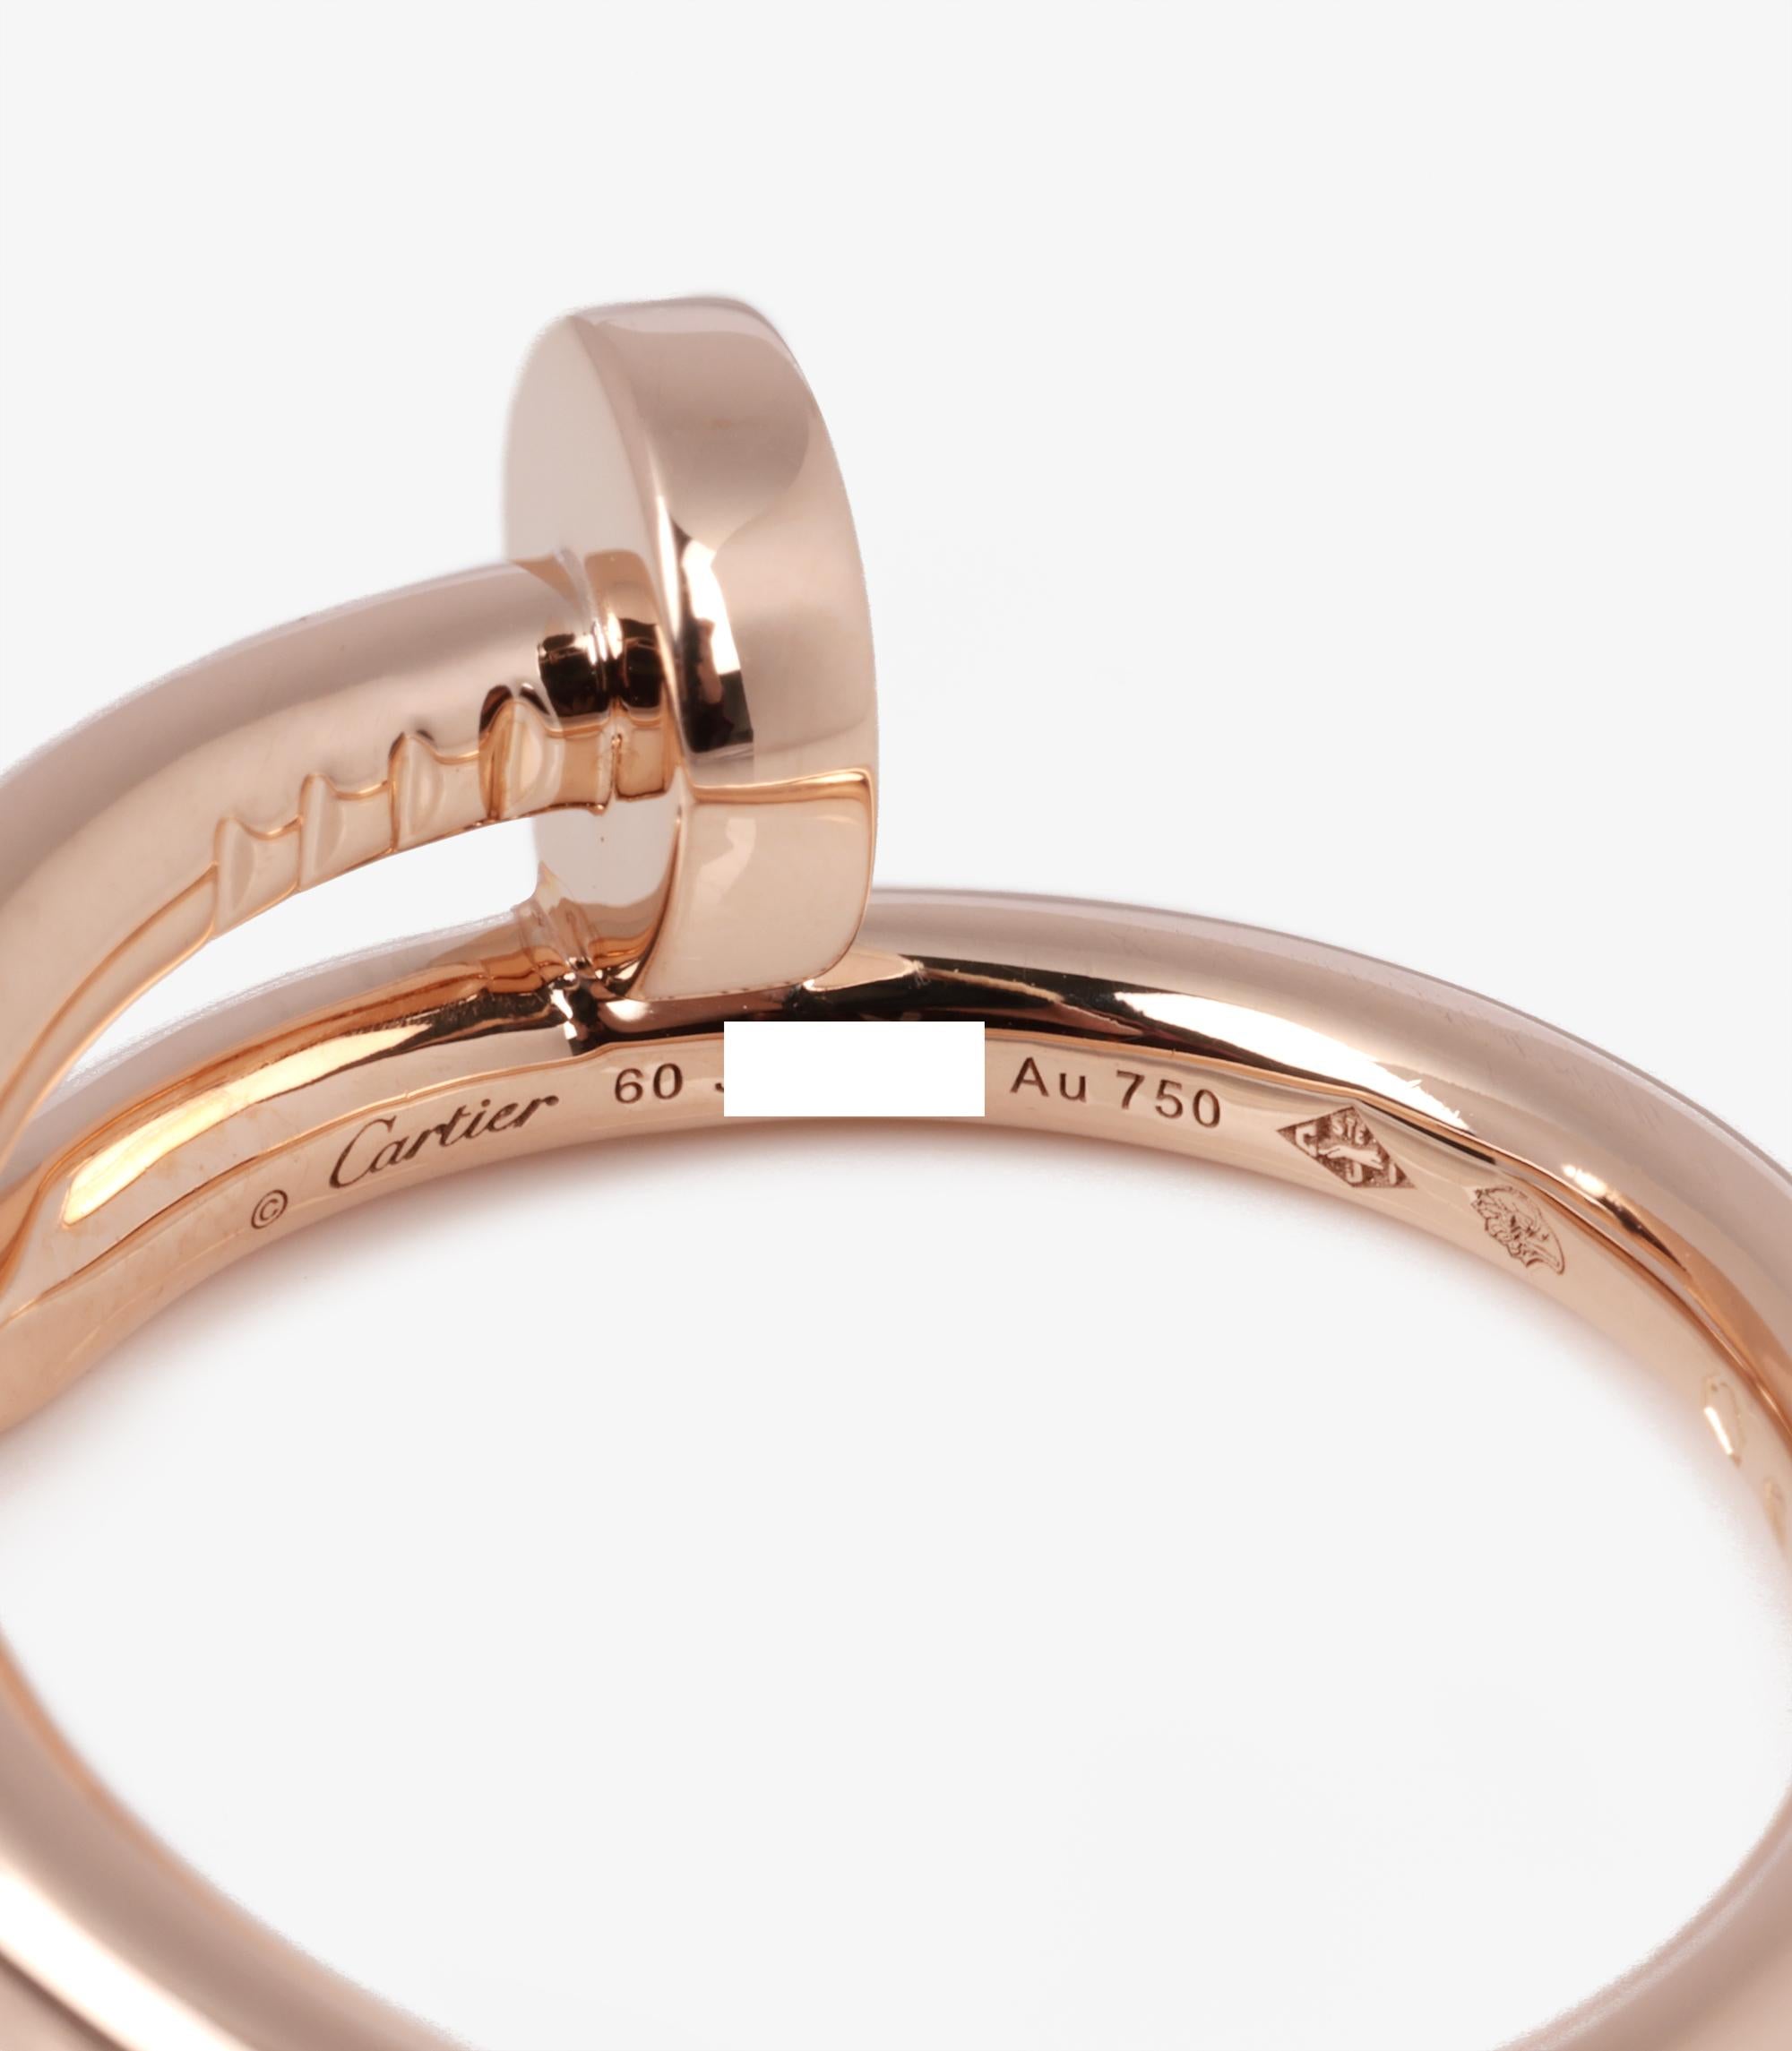 Cartier 18ct Rose Gold Juste Un Clou Ring In Excellent Condition For Sale In Bishop's Stortford, Hertfordshire